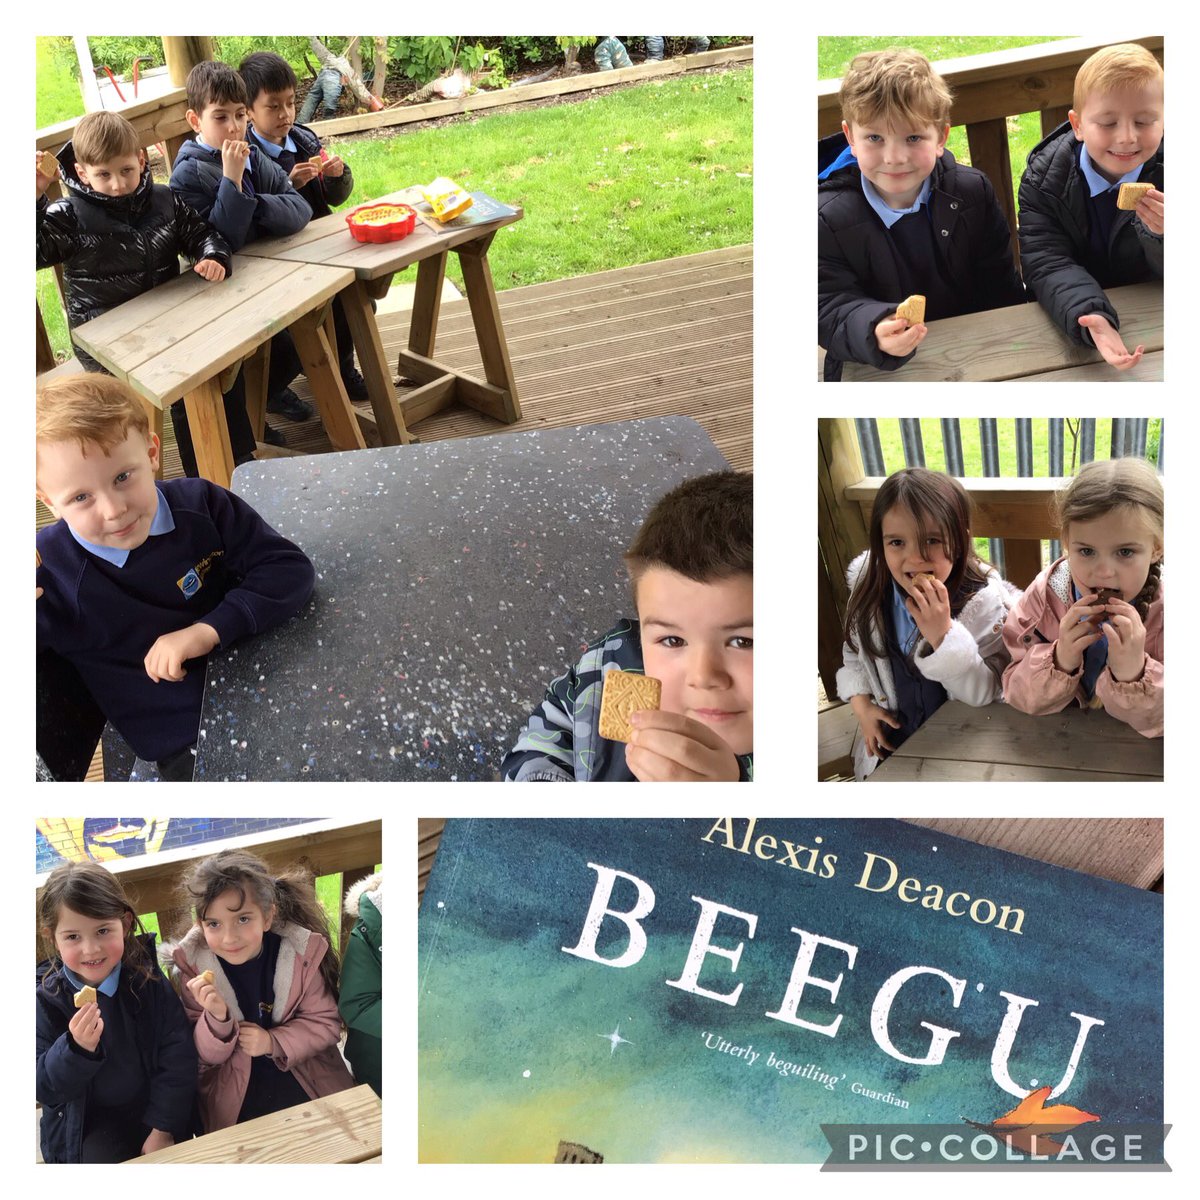 Reading plus with a twist!

Reading our class book in the outdoor classroom with a biscuit this afternoon 💙

We love Beegu💙

@wearenewington #reading #readingforpleasure